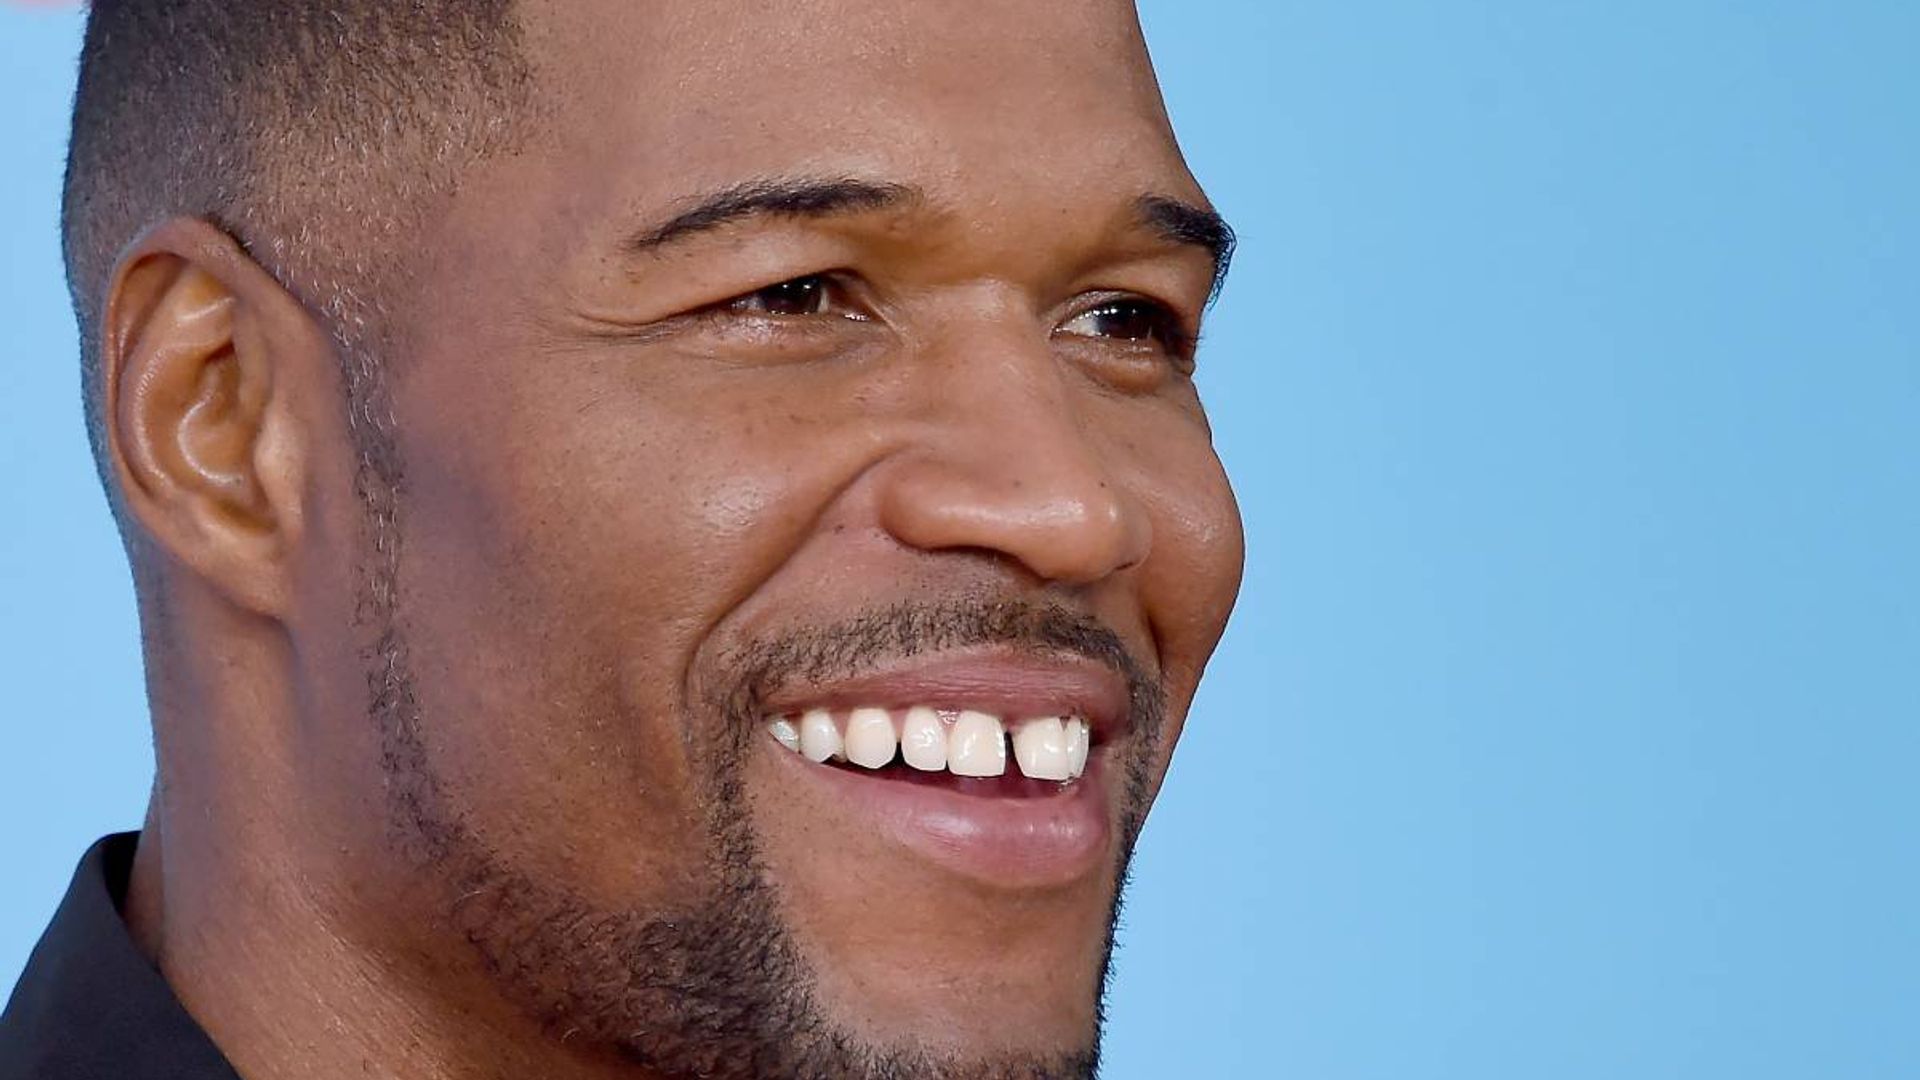 Michael Strahan's dinner date with 'daughter' gets fans talking